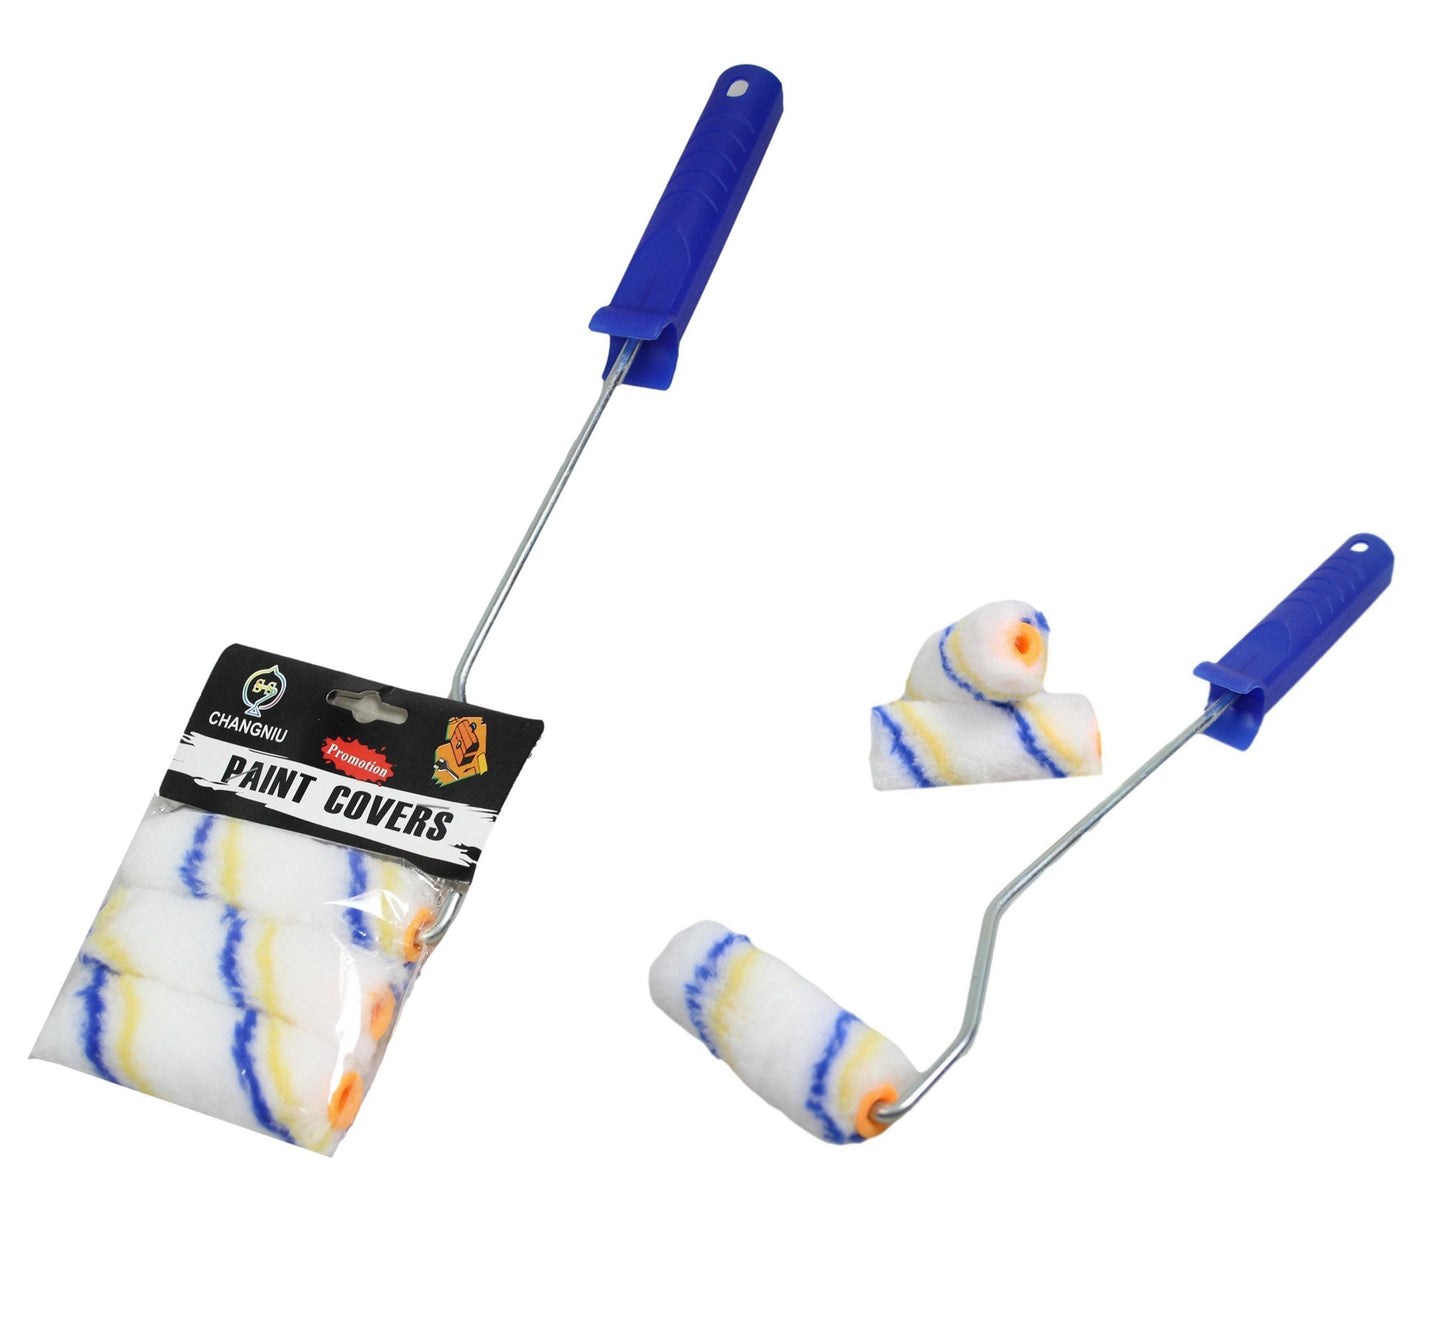 Blue Handle Paint Roller Set With 3 Roller Heads For Walls Ceilings 39 cm 5713 (Parcel Rate)